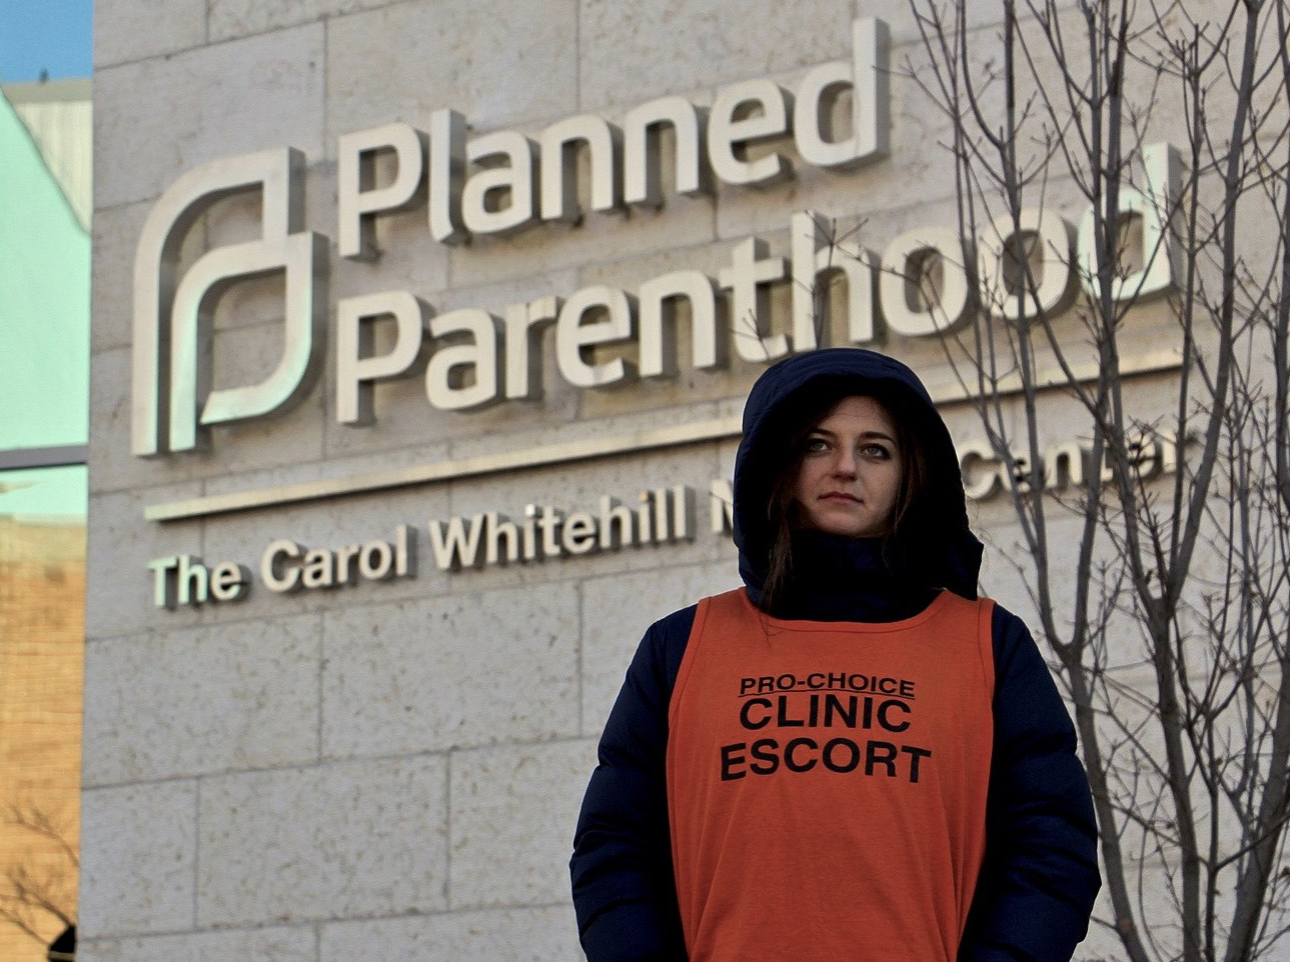 Abortion aide standing in front of Planned Parenthood sign